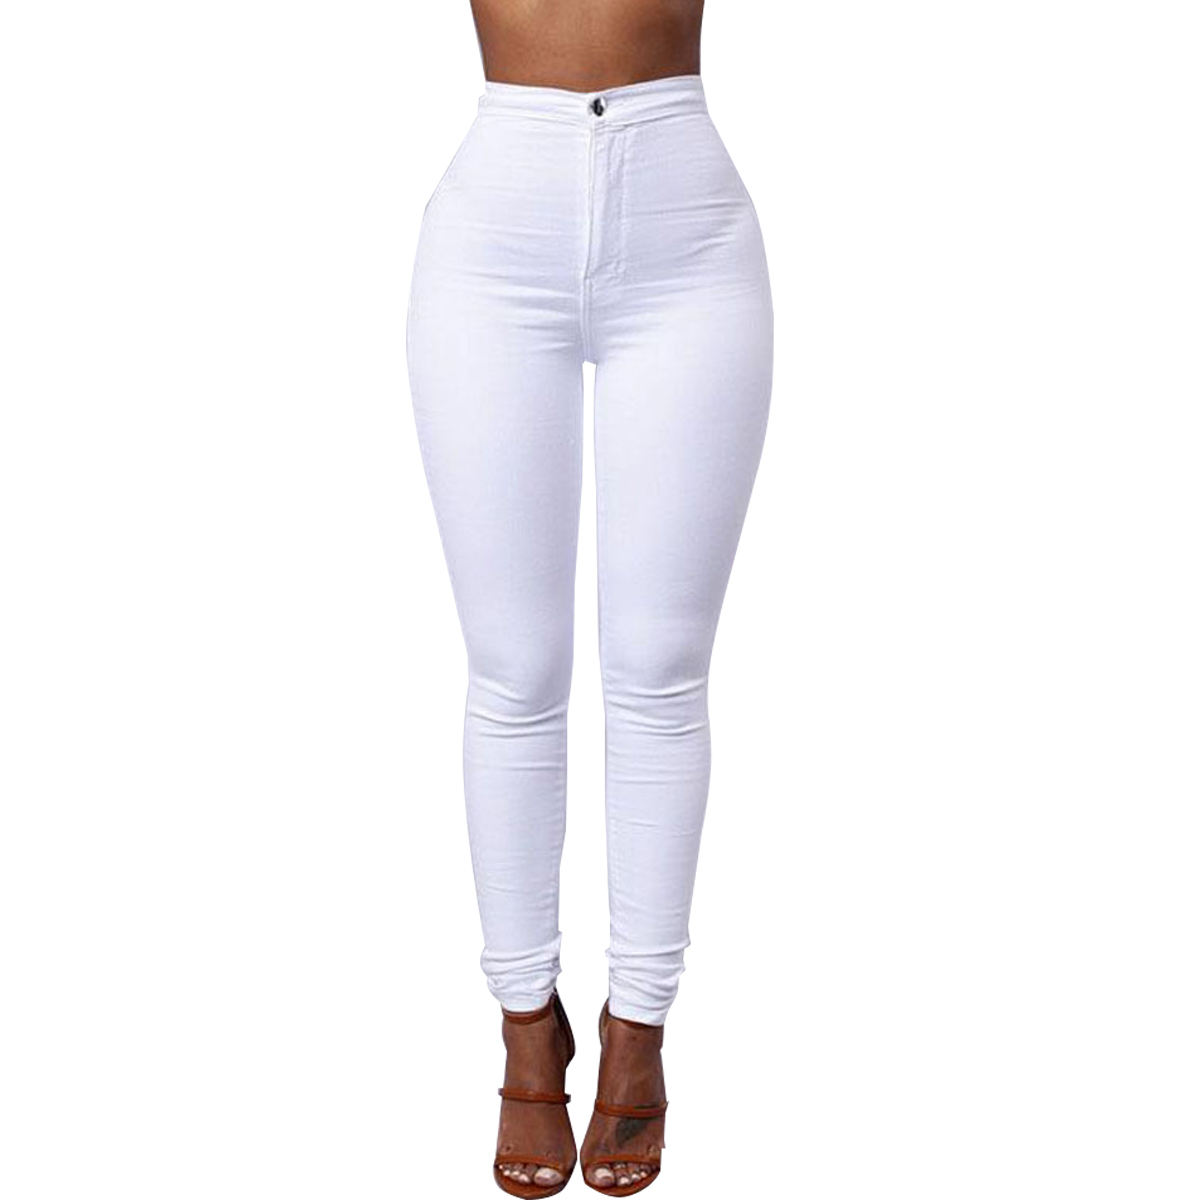 Woman Pencil Stretch Casual Look Denim Skinny Jeans Pants High Waist Trousers - image 5 of 5